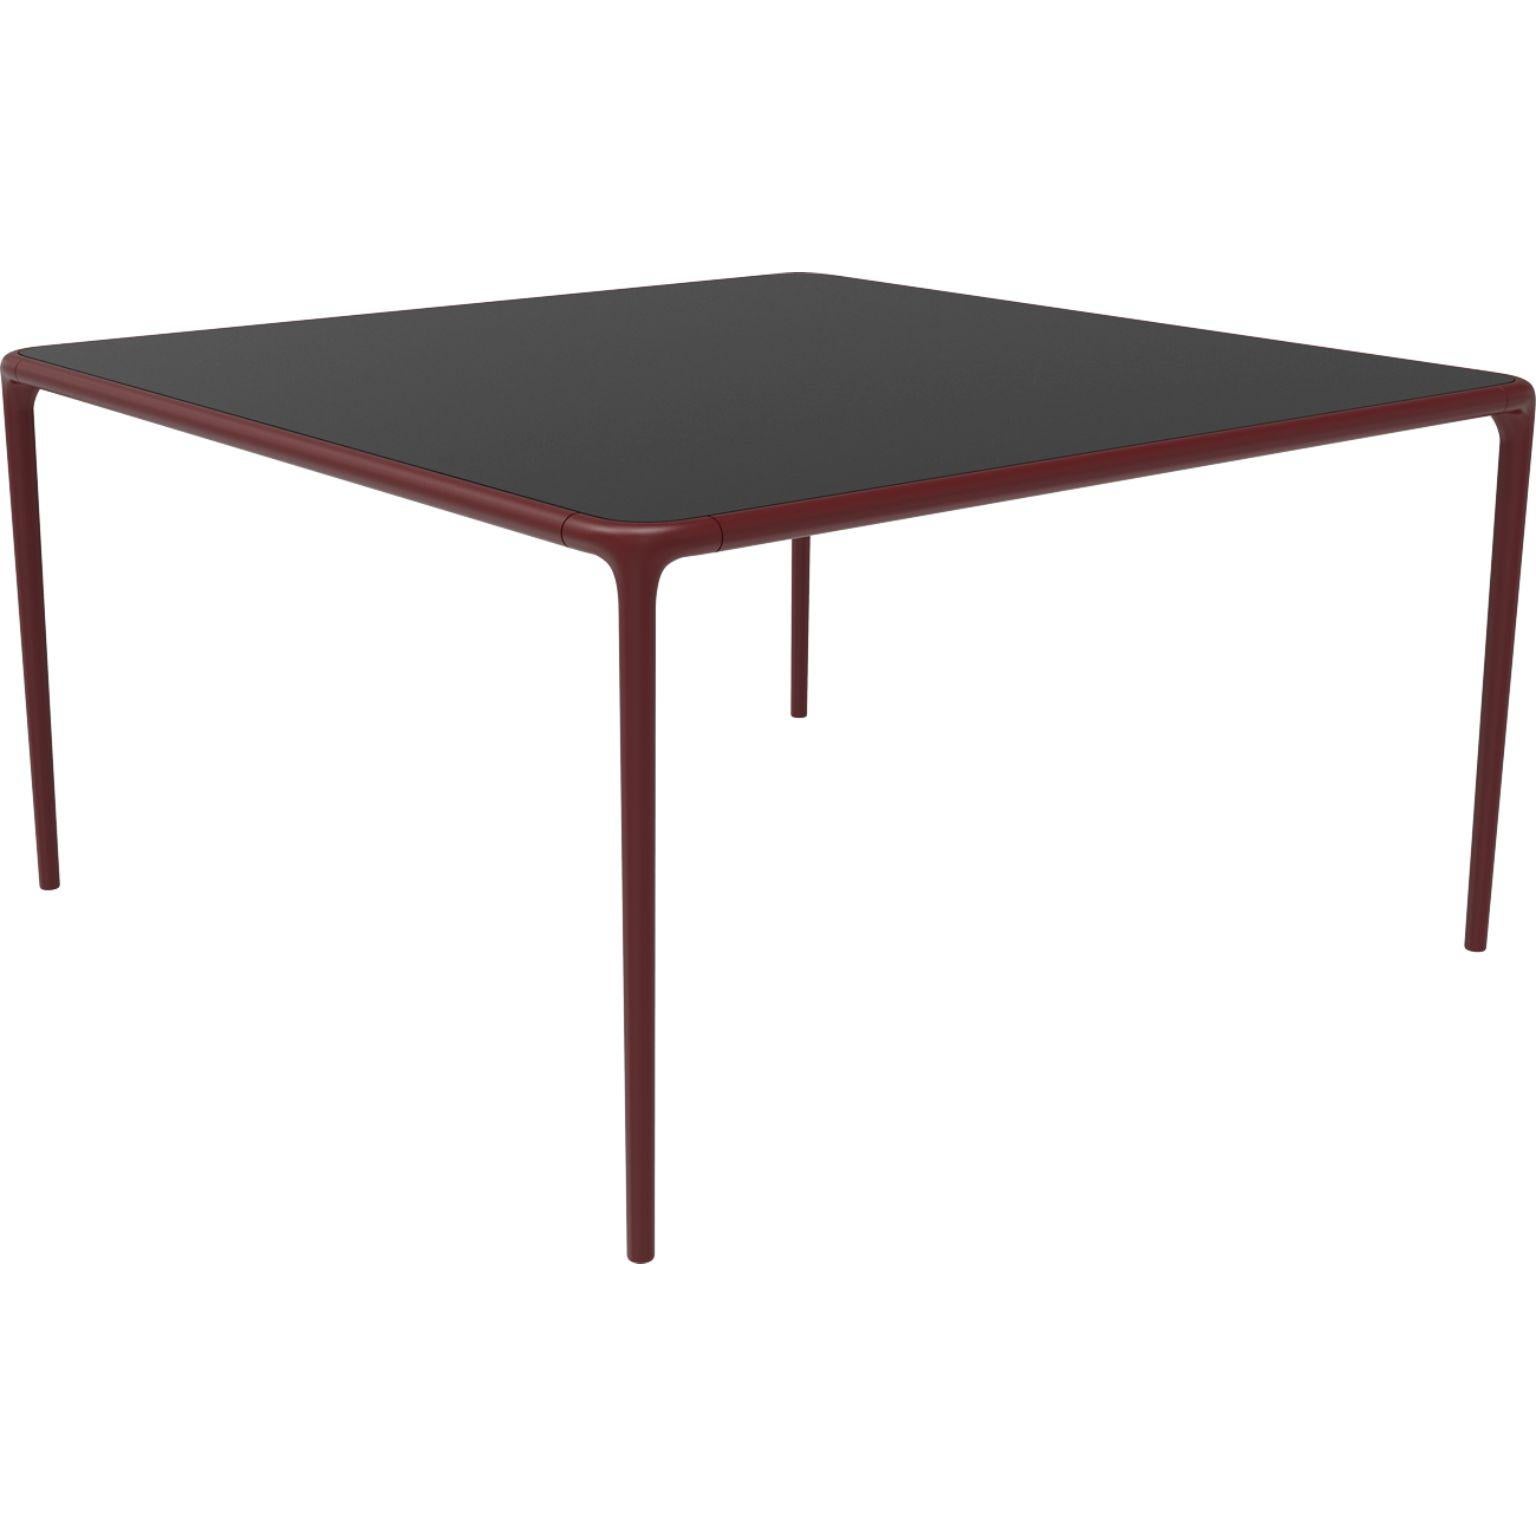 Xaloc burgundy glass top table 140 by MOWEE
Dimensions: D140 x W140 x H74 cm
Material: Aluminum, tinted tempered glass top.
Also available in different aluminum colors and finishes (HPL Black Edge or Neolith). 

Xaloc synthesizes the lines of